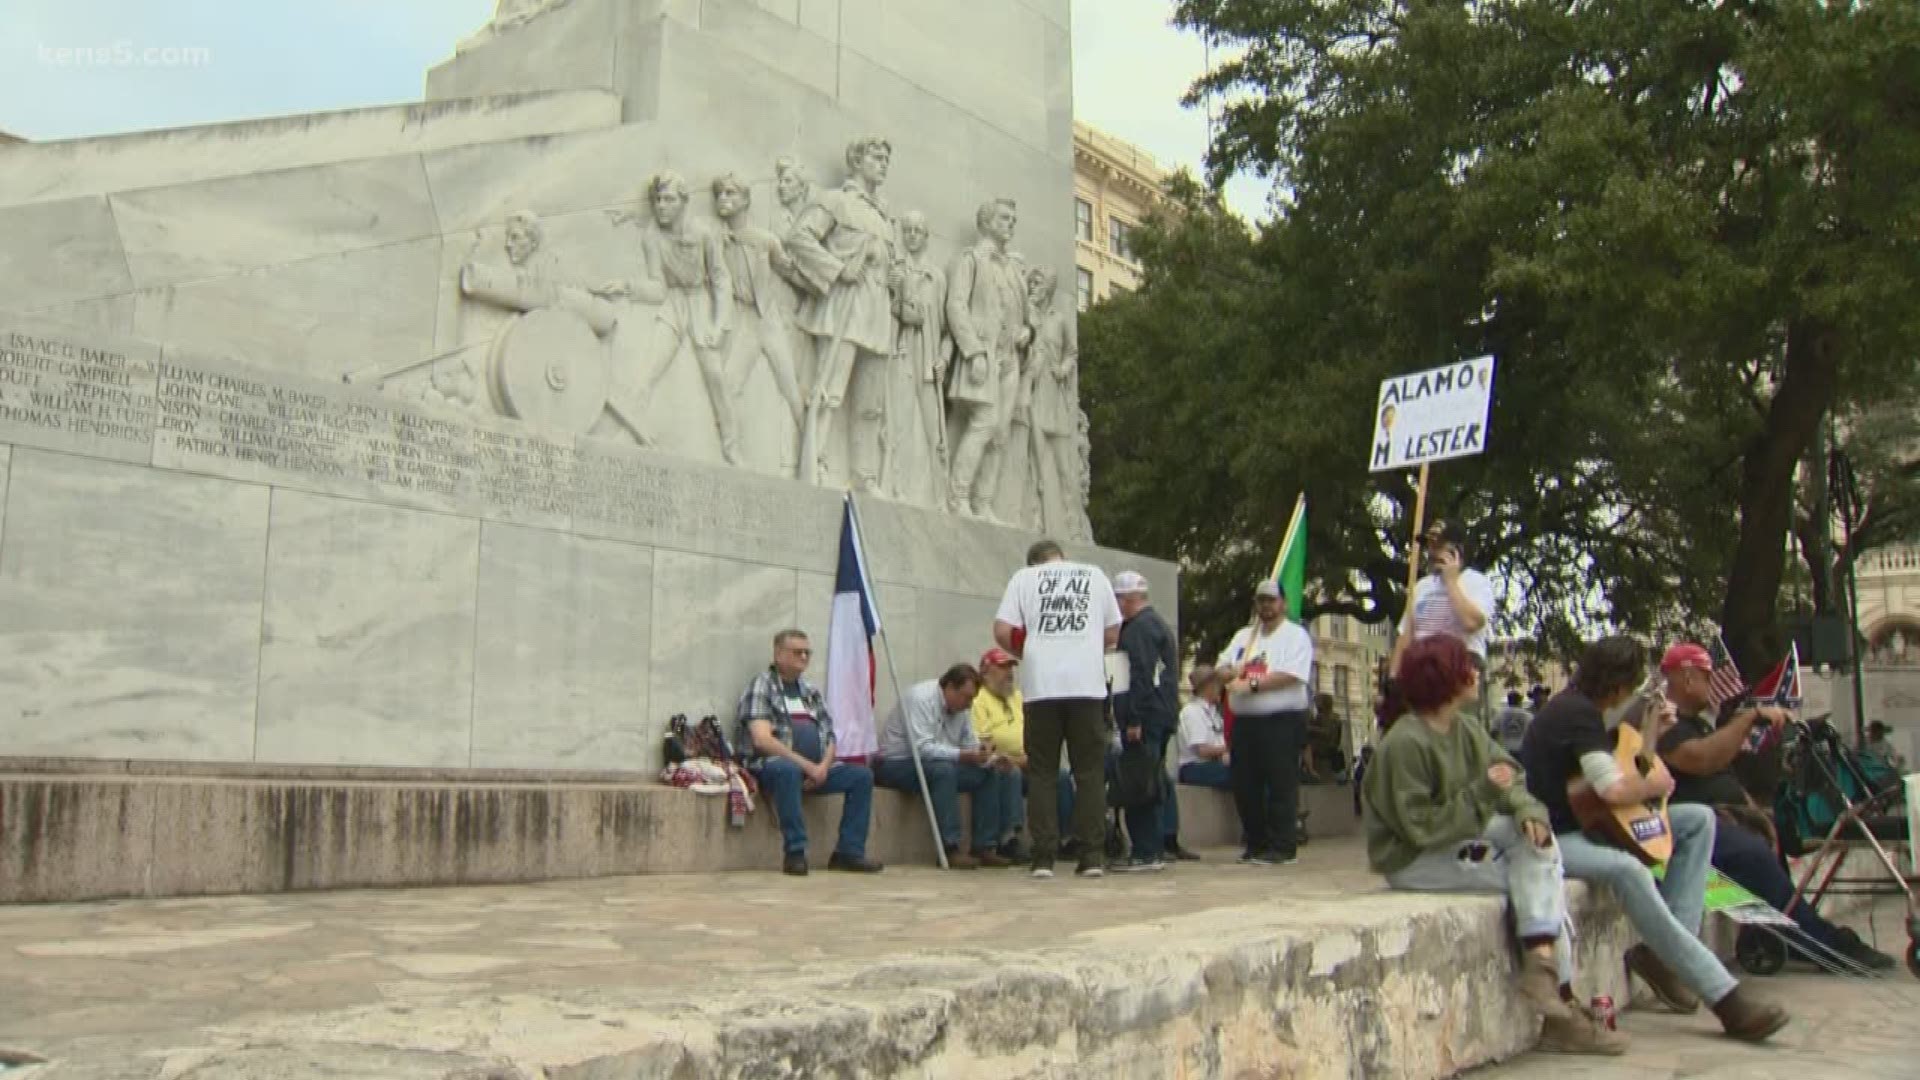 The Cenotaph is a 60-foot tall monument honoring the defenders of the Alamo. But a new plan calls for it to be moved 450 feet away.